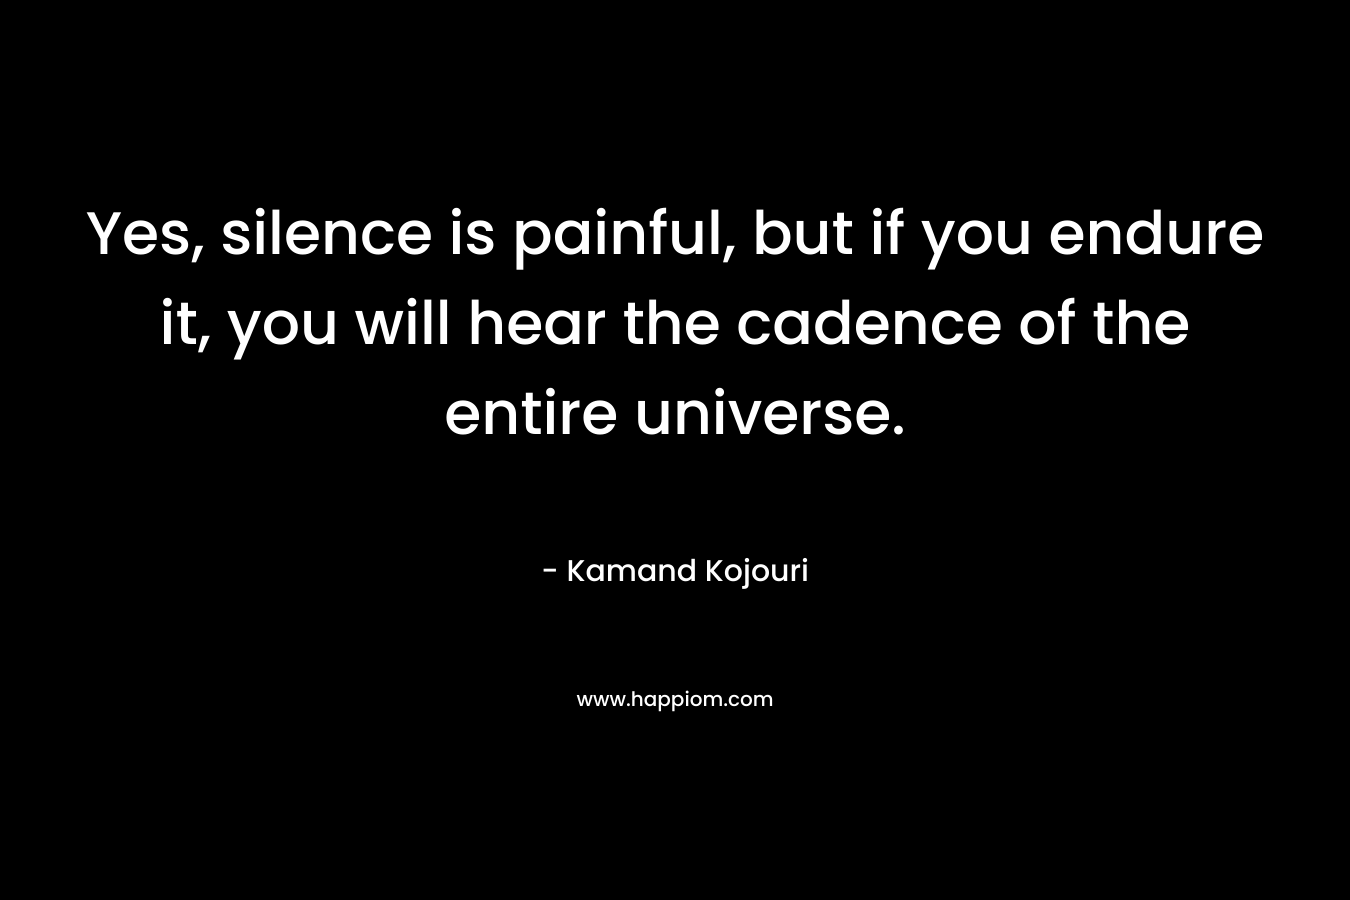 Yes, silence is painful, but if you endure it, you will hear the cadence of the entire universe.